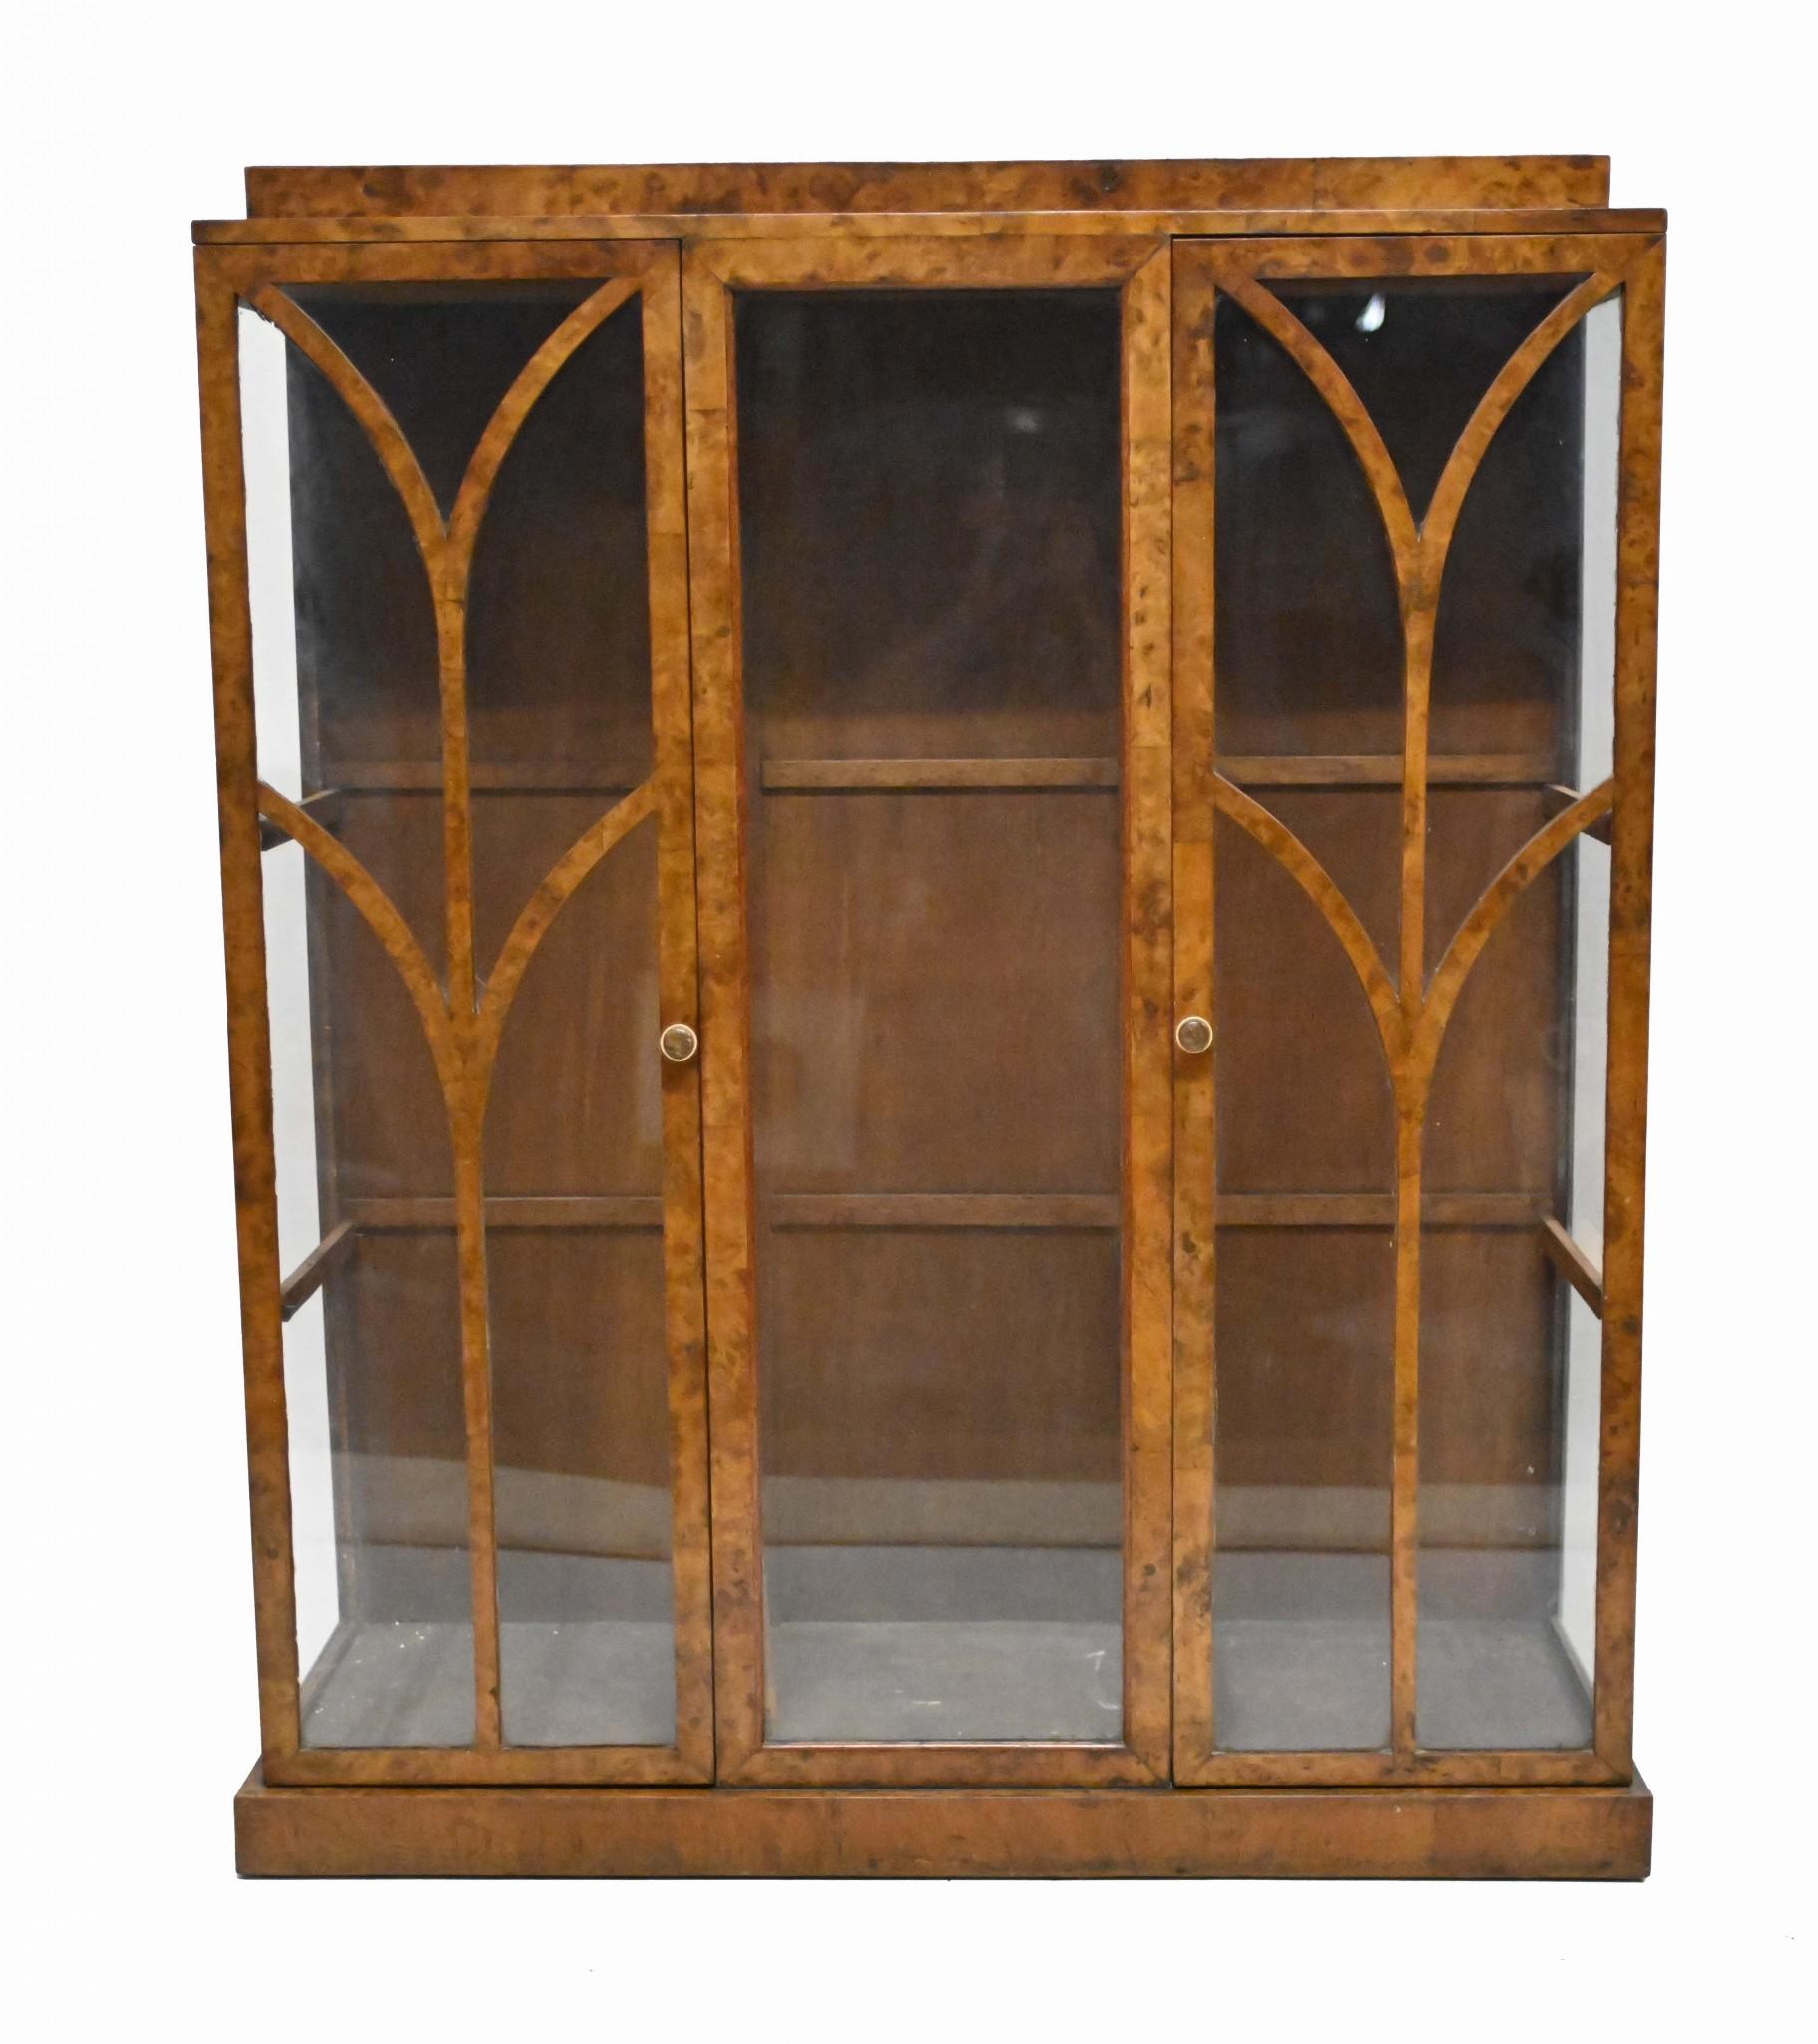 Elegant period art deco china or display cabinet in burr walnu
Circa 1930s on this piece of classic Roaring Twenties interiors
Clean and minimal design great for modern interiors
Viewings available by appointment
Offered in great shape ready for